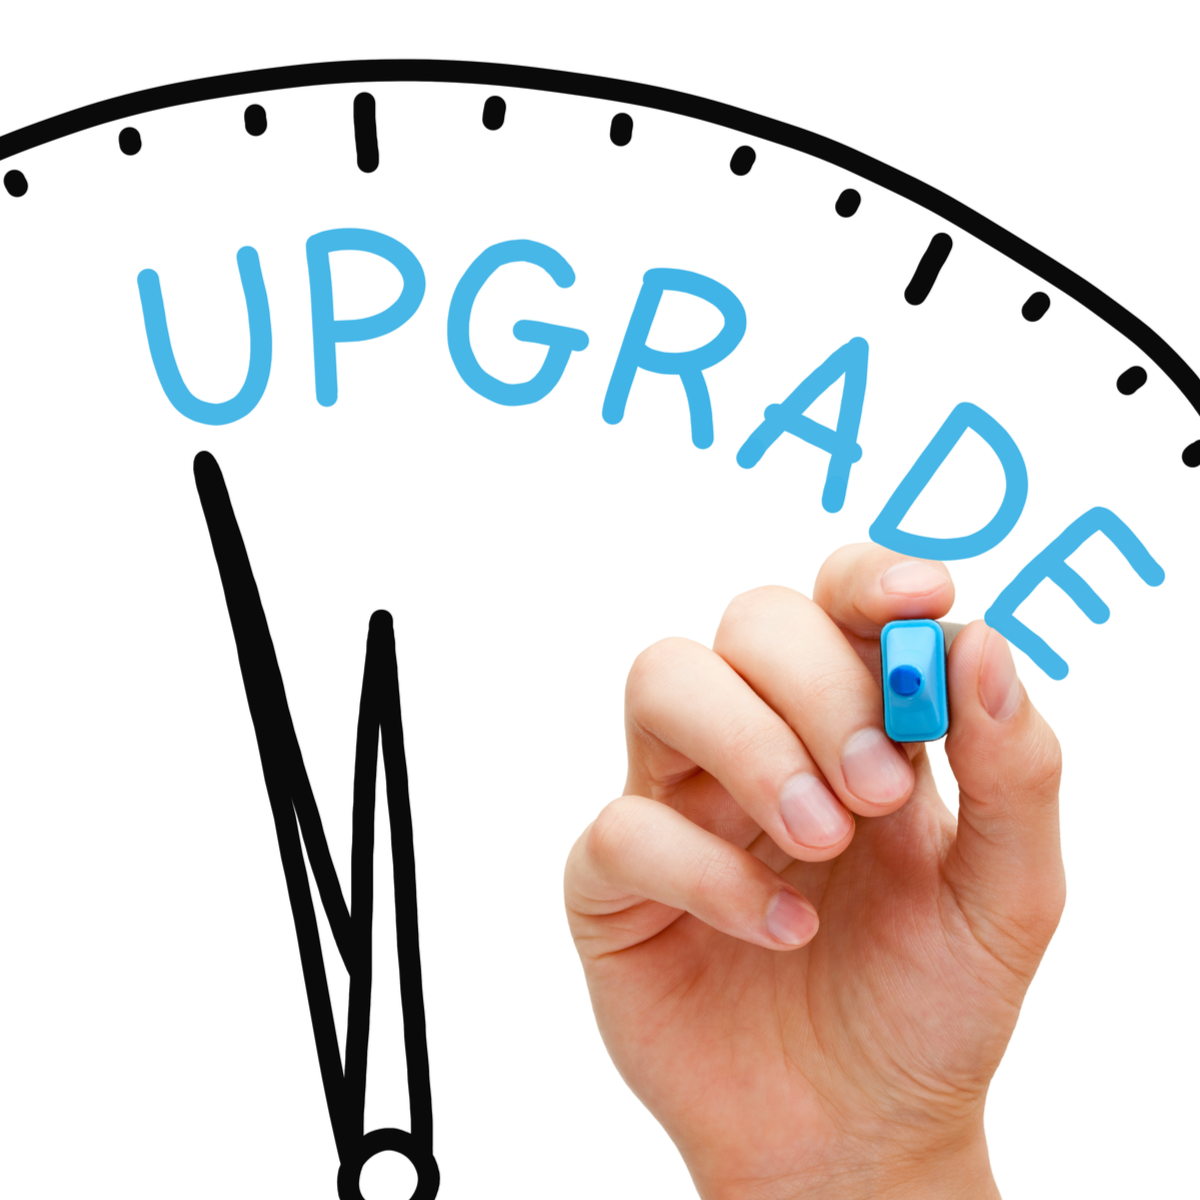 Windows 7 to Windows 10 upgrade FAQ: Here are the answers